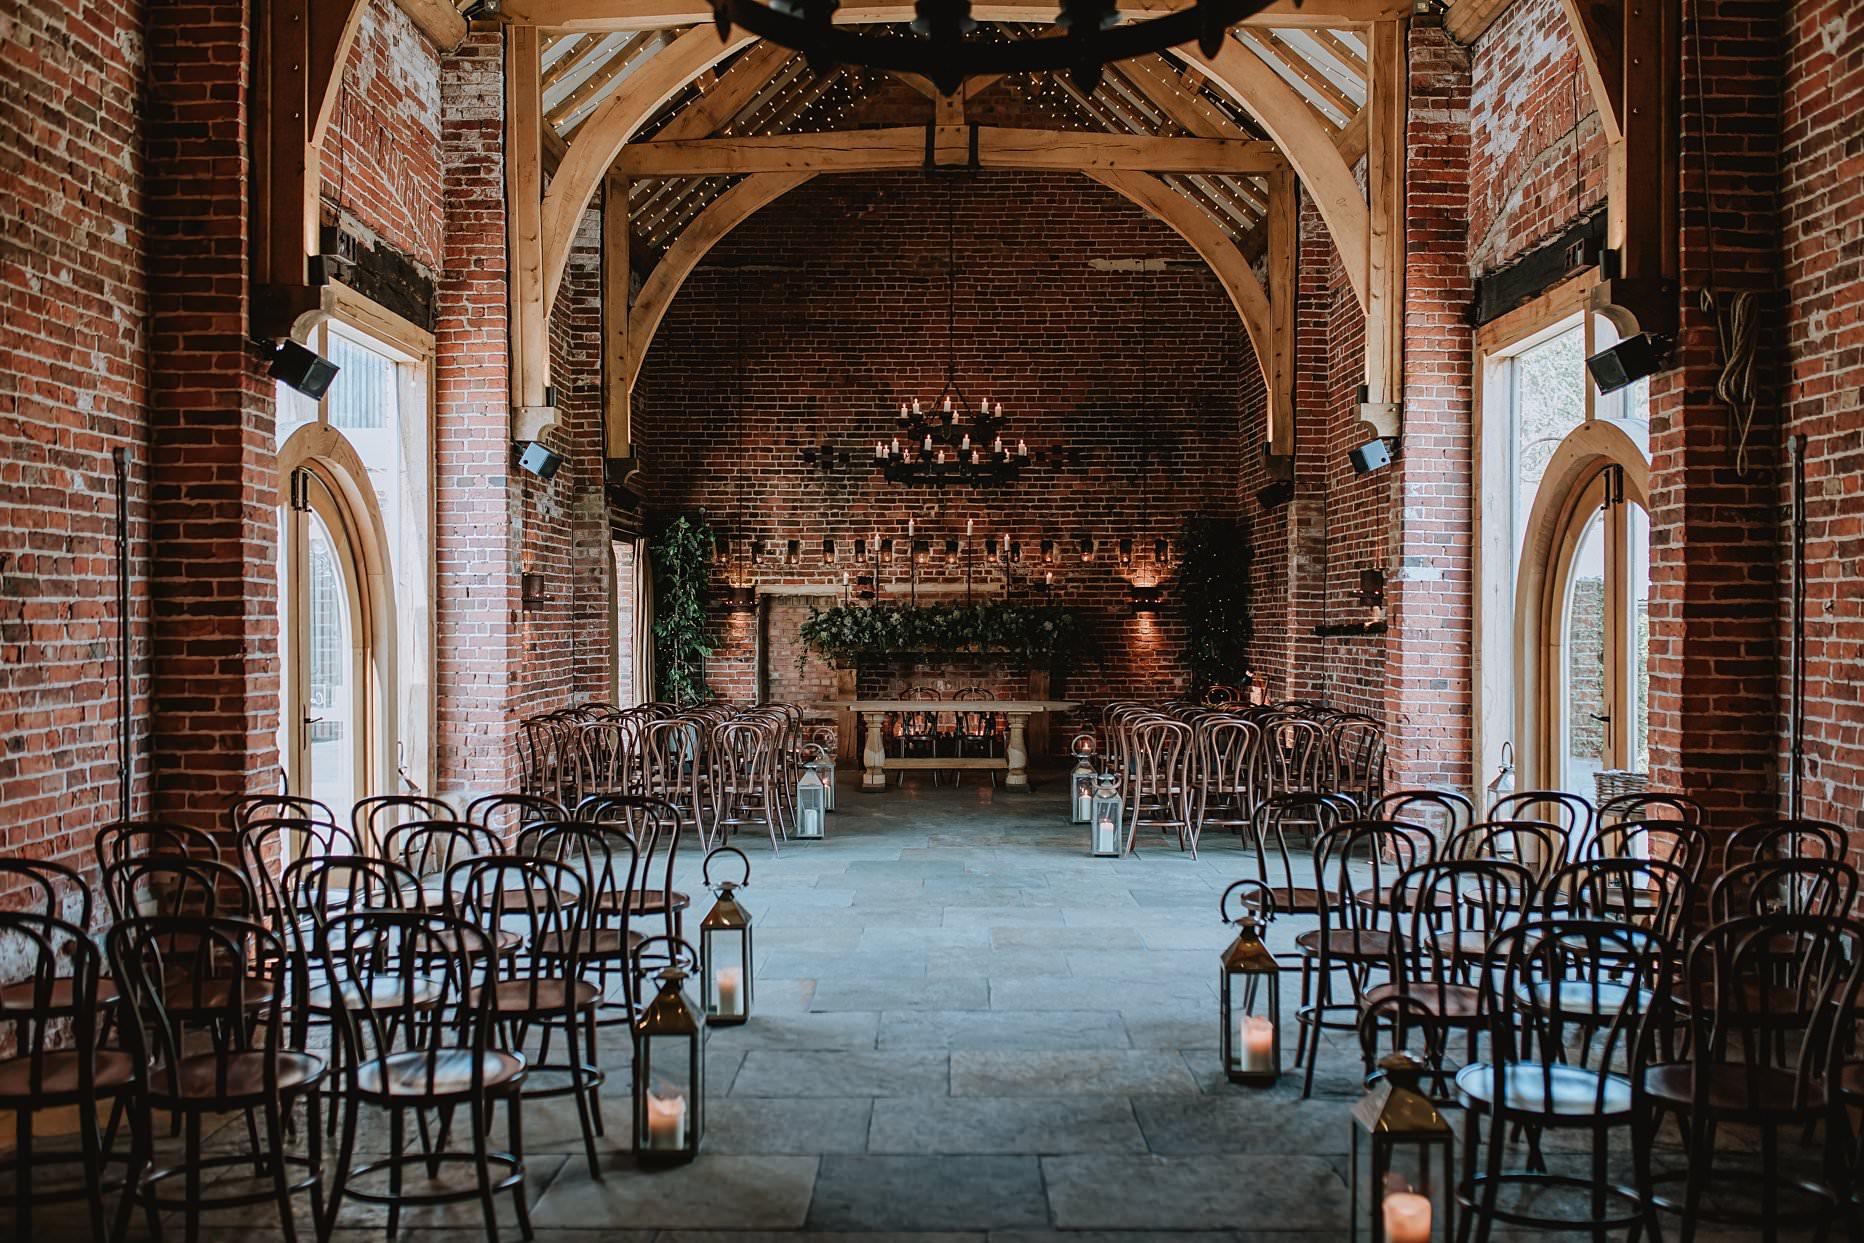 Interior of the ceremony room at Hazel Gap Barn. Exposed brick walls and wooden beams the room is decorated with candles.